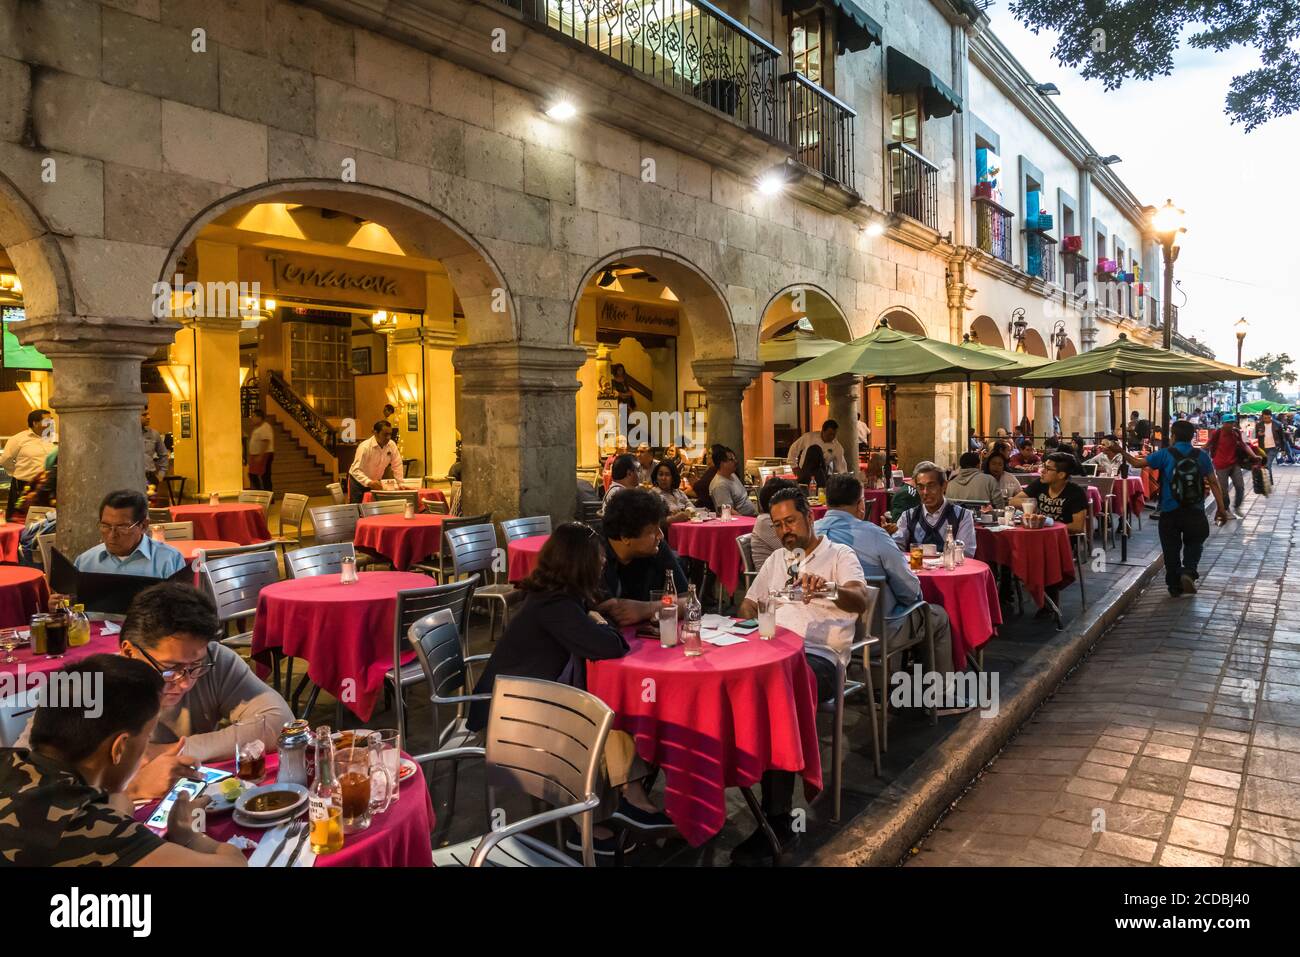 Tourists dining in restaurants in the old historic buildings surrounding the Zocalo, or main plaza in the historic center of Oaxaca, Mexico. Stock Photo